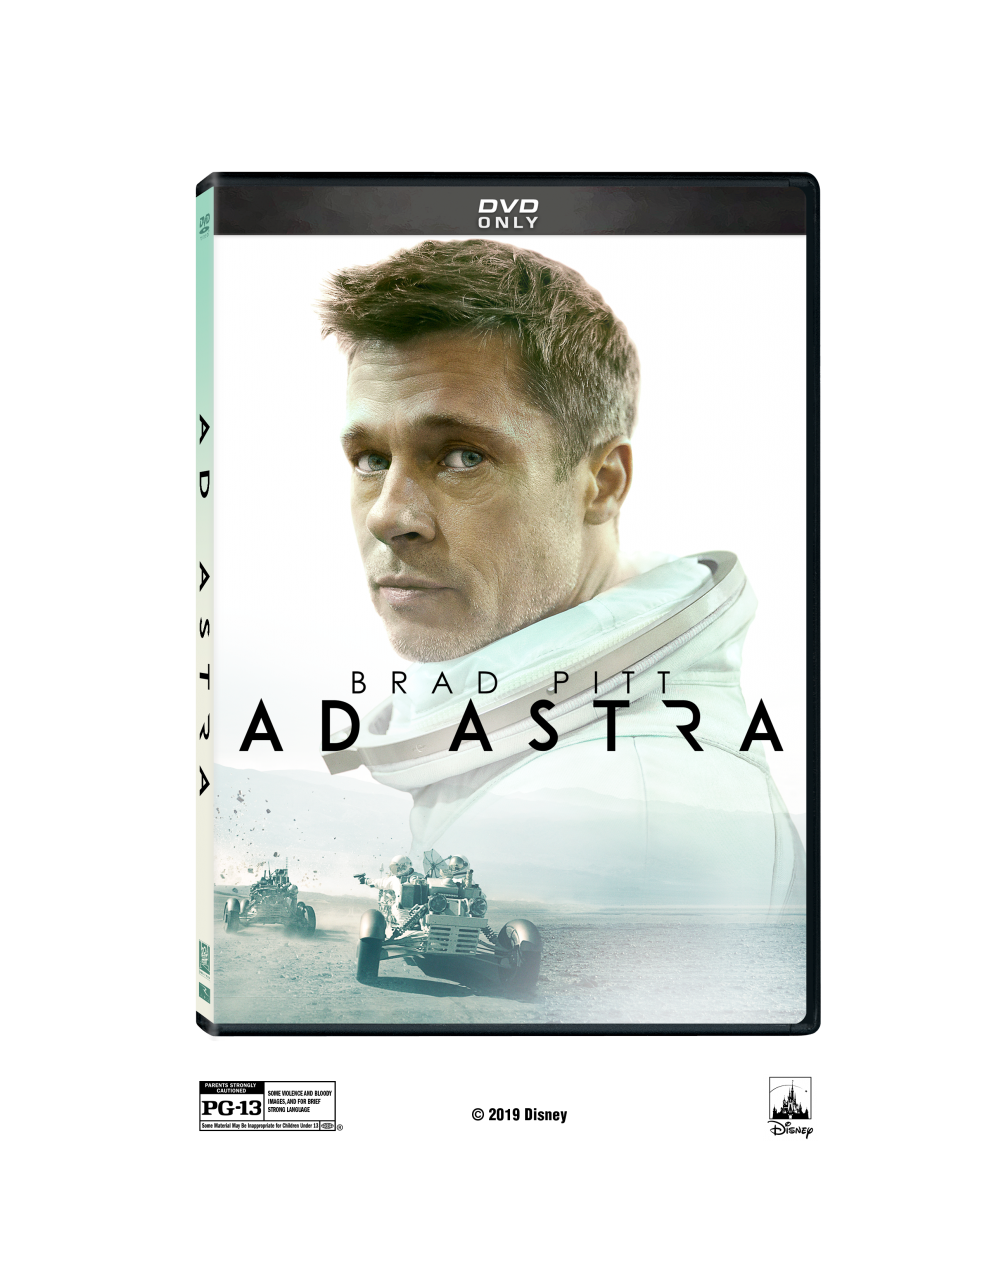 Ad Astra DVD cover (20th Century Fox Home Entertainment)